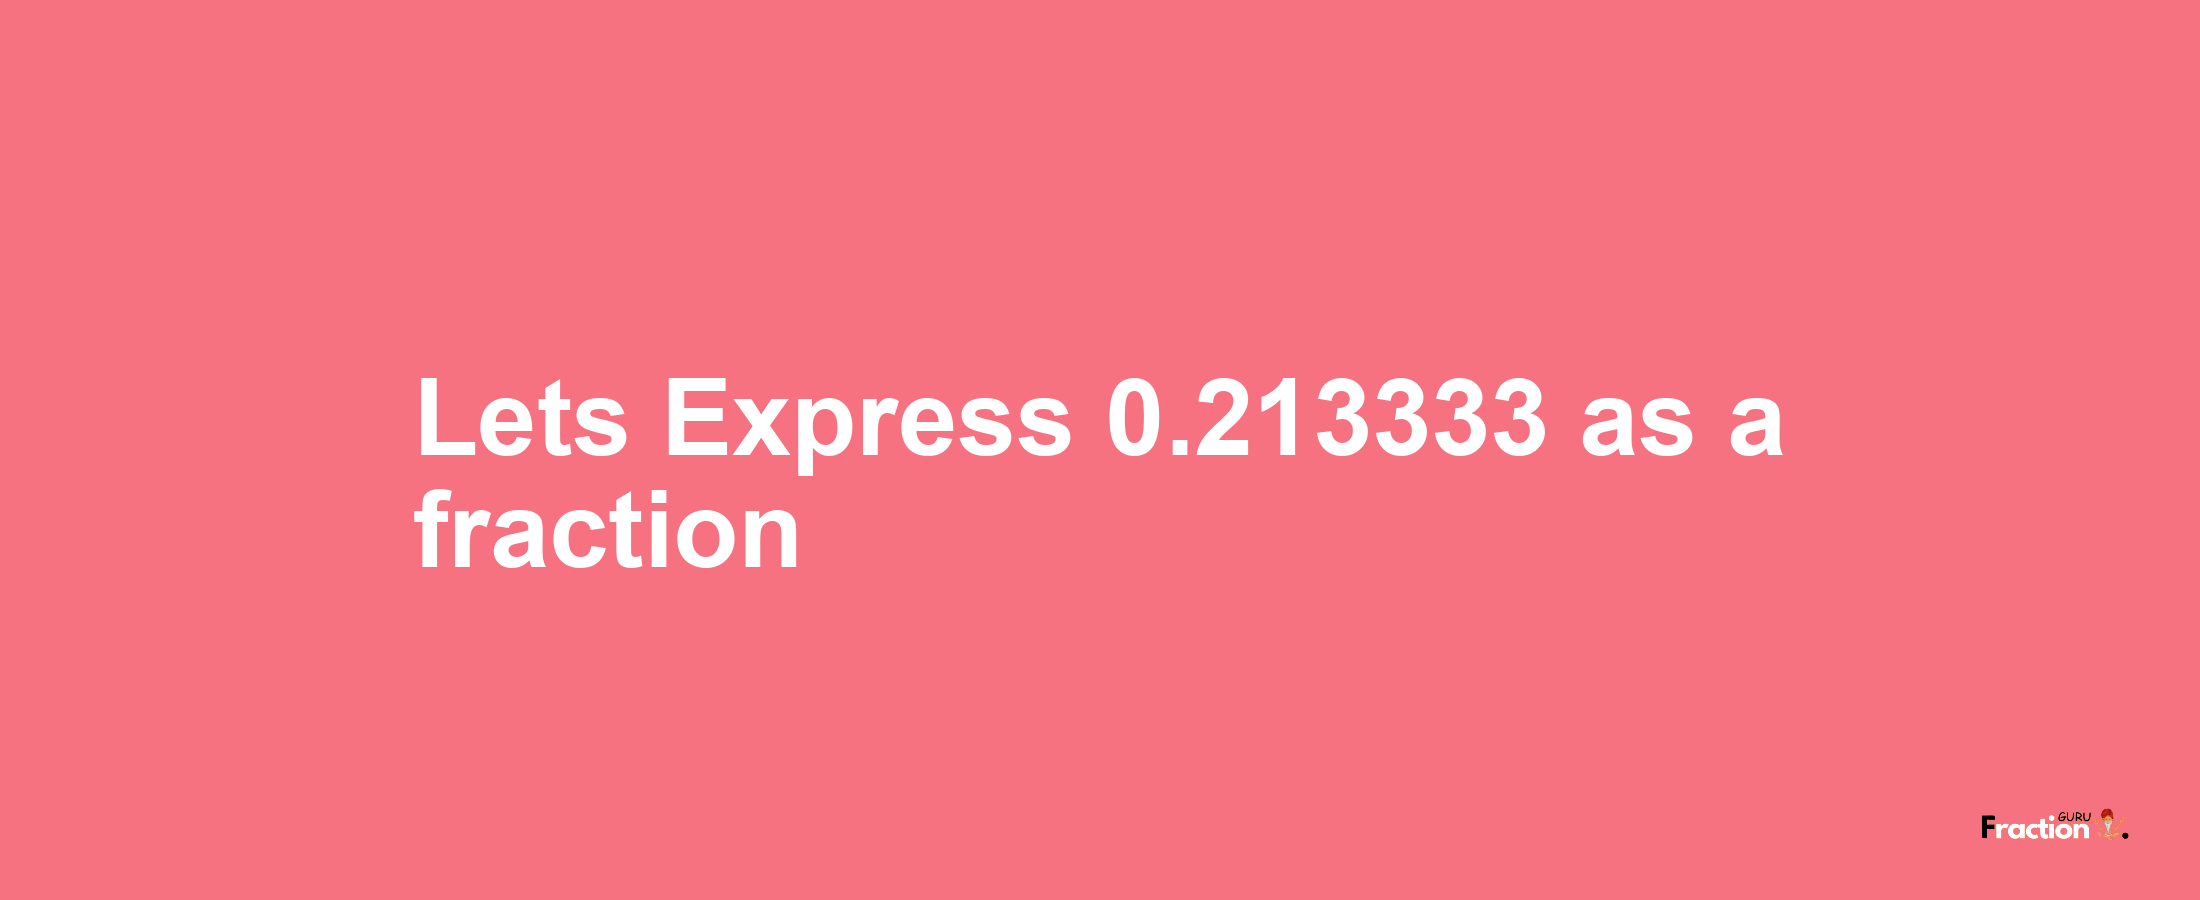 Lets Express 0.213333 as afraction